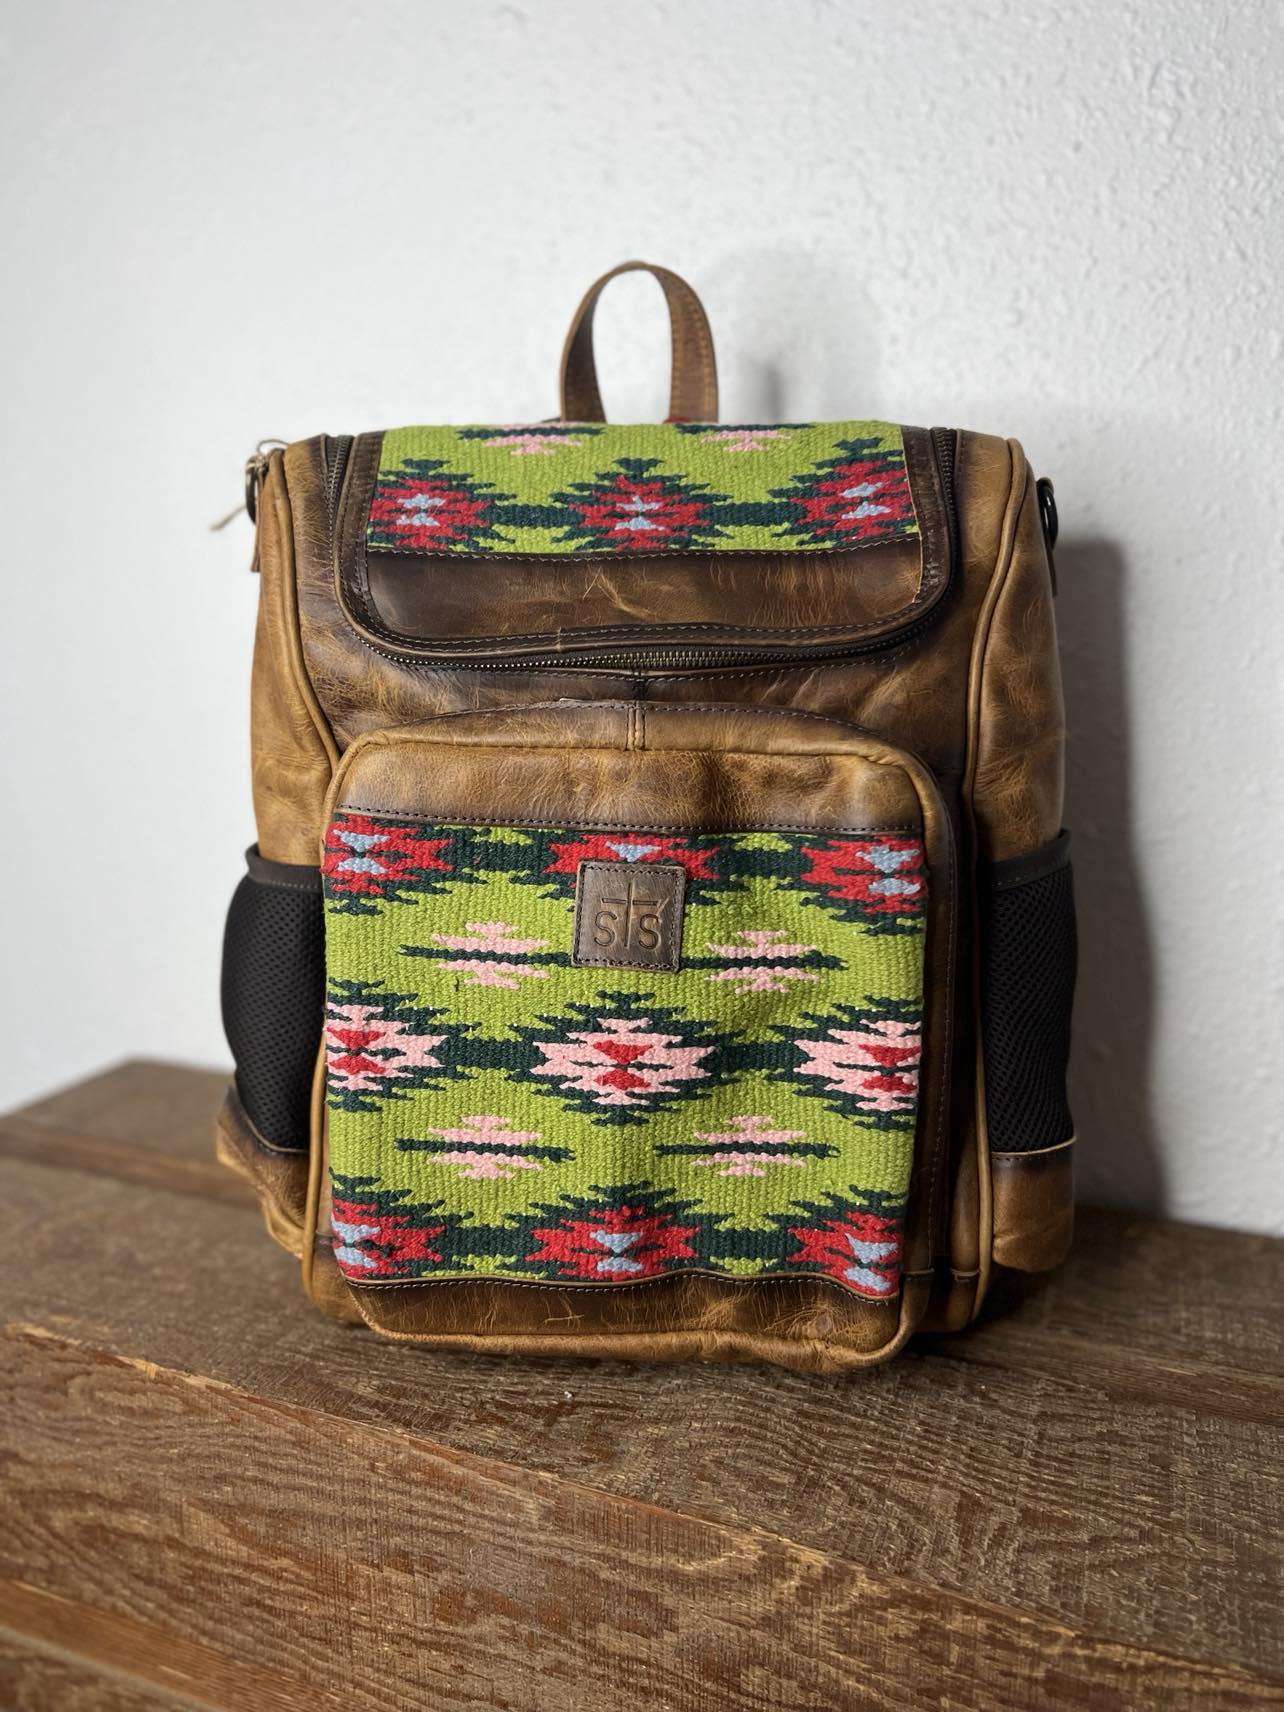 STS Baja Dreams Laini Backpack-Handbags-Carrol STS Ranchwear-Lucky J Boots & More, Women's, Men's, & Kids Western Store Located in Carthage, MO